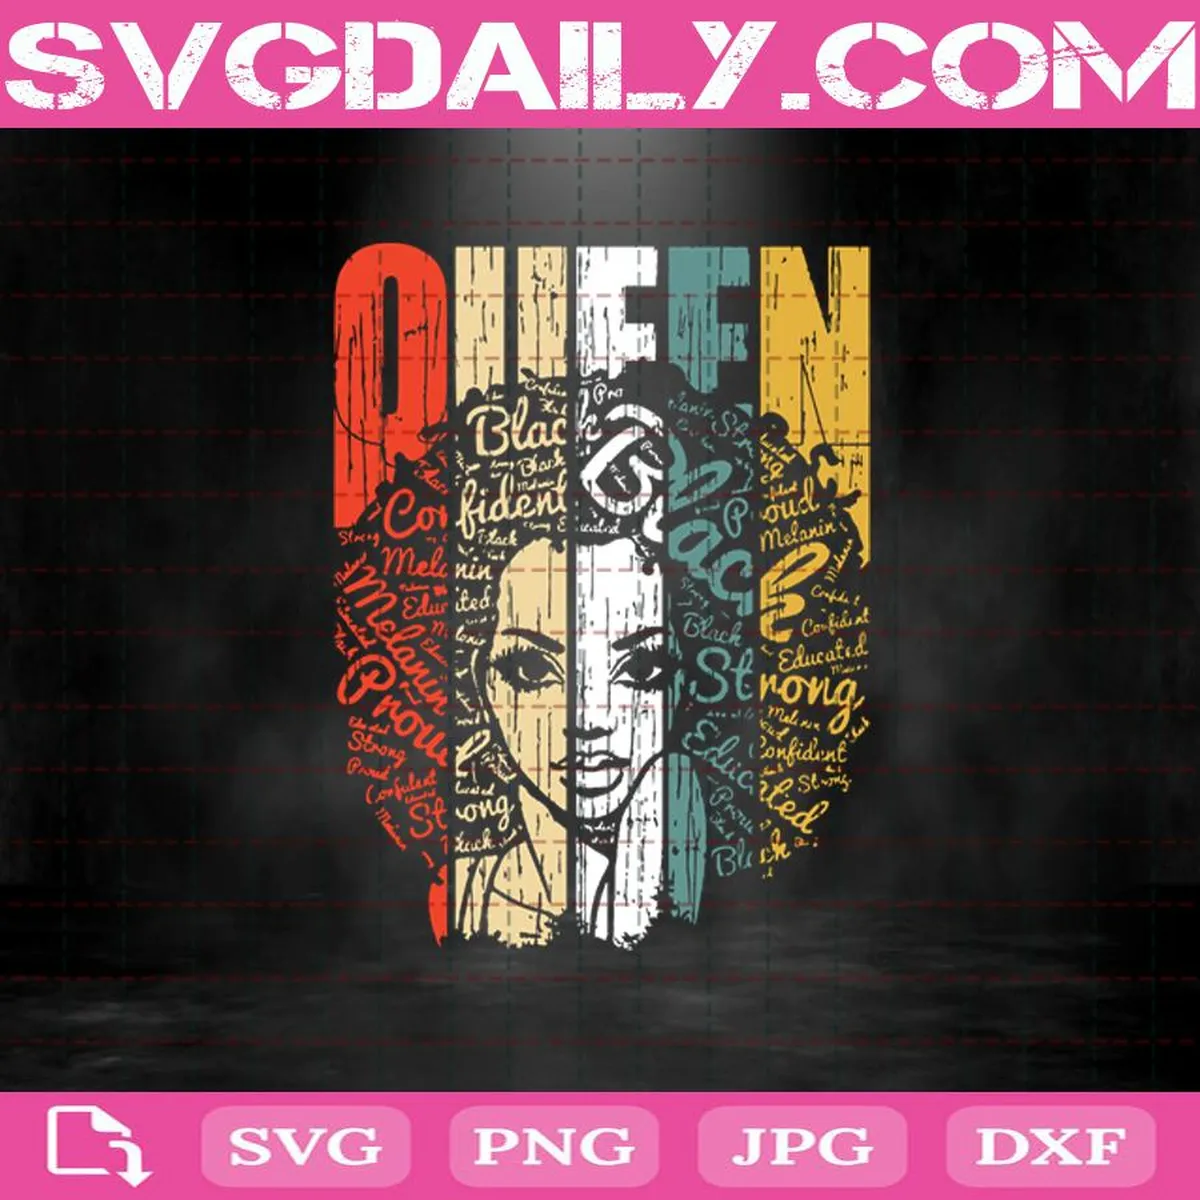 African American For Educated Strong Black Woman Queen Svg, Black Queen Svg, Black Woman Queen Svg